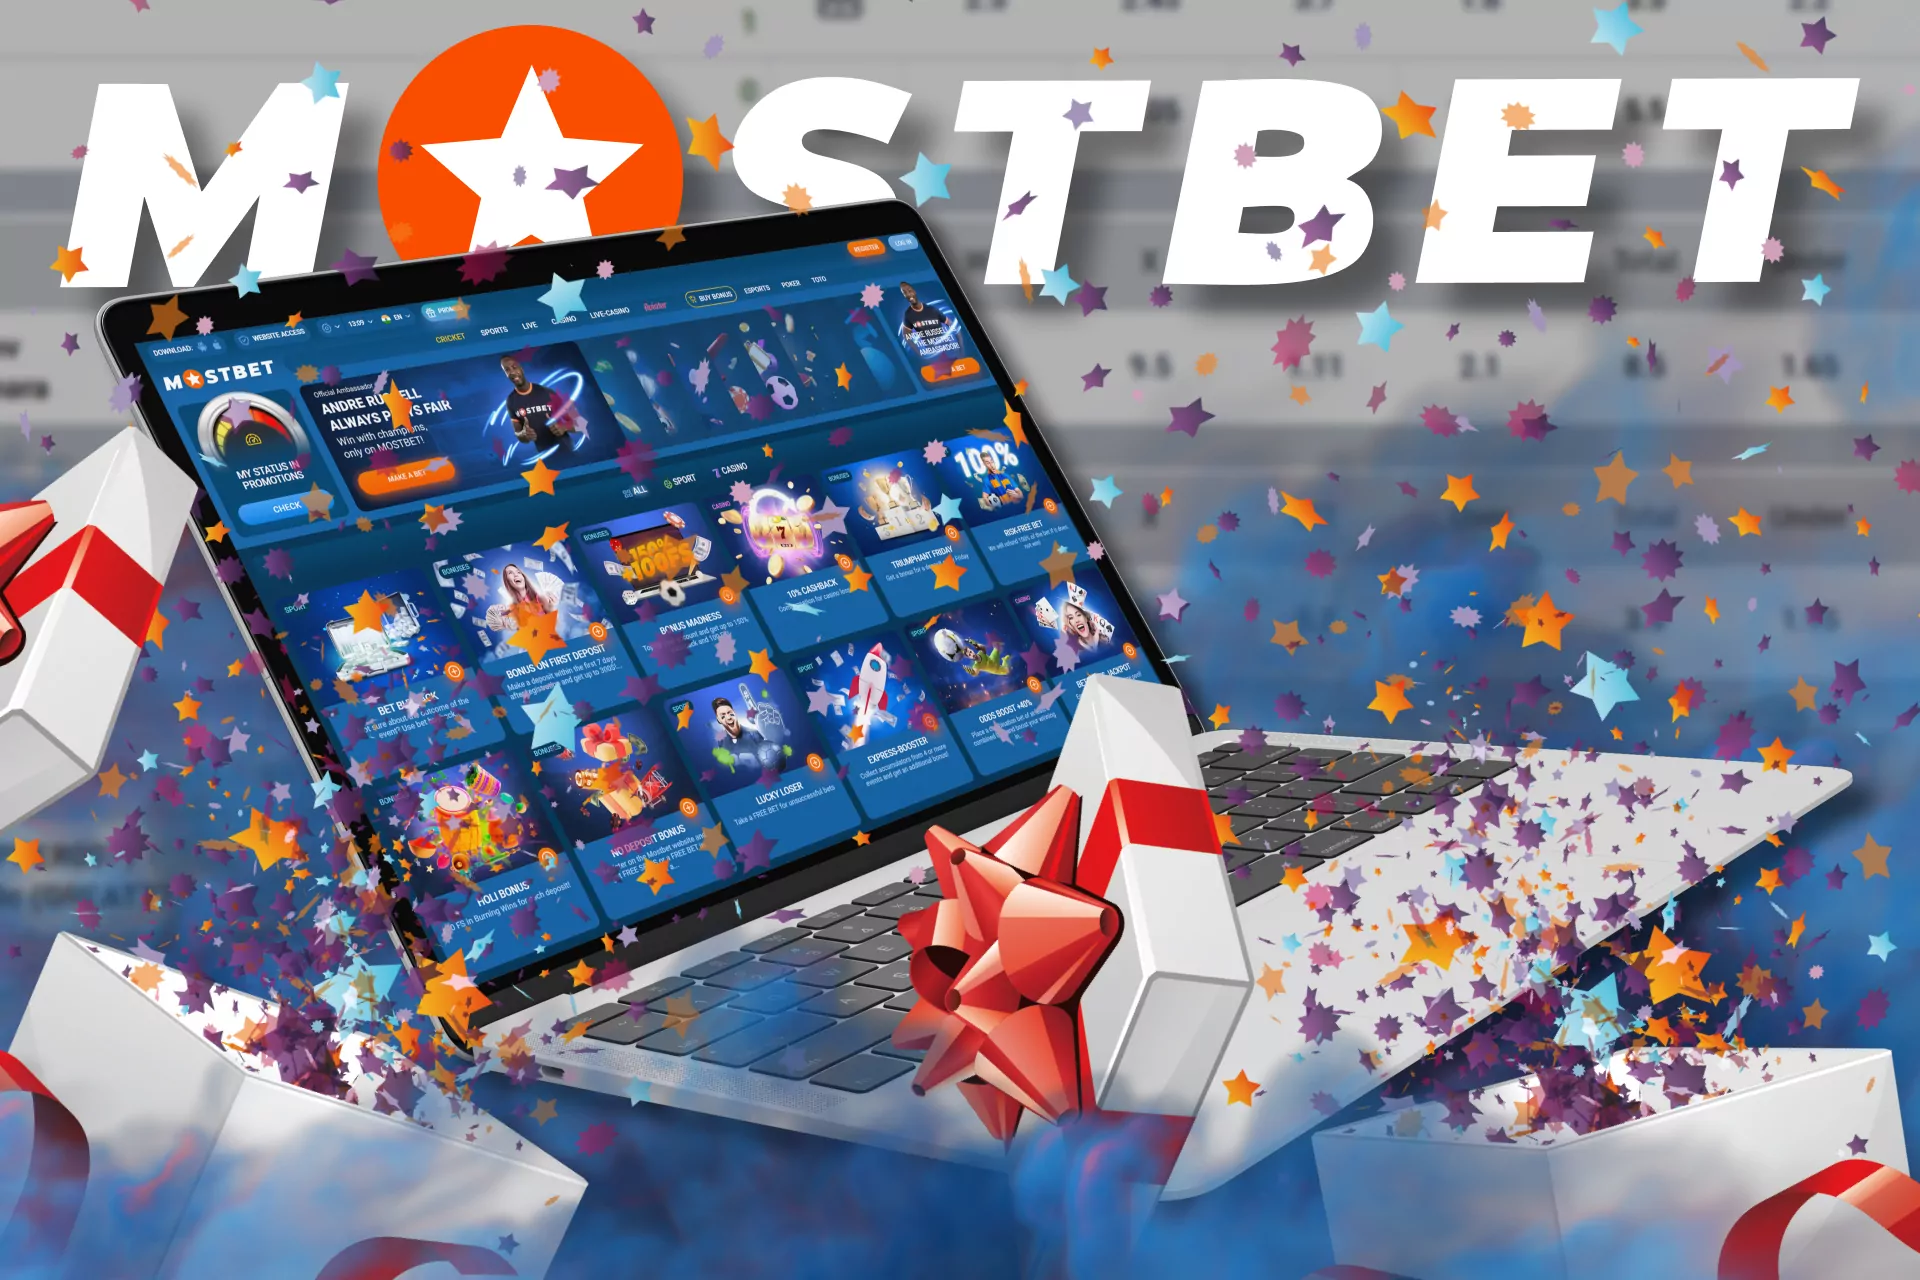 At Mostbet all users can get special bonuses for more profitable bets.